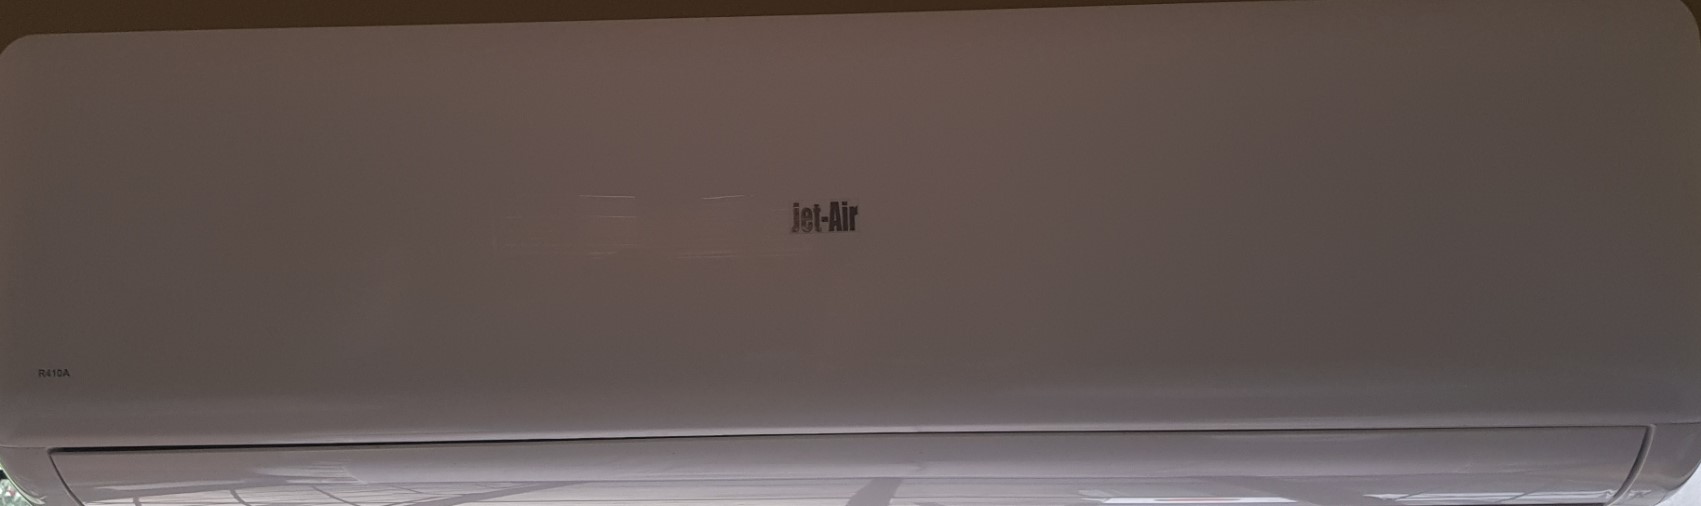 Aircon jet-AIR Mounted room air conditioner